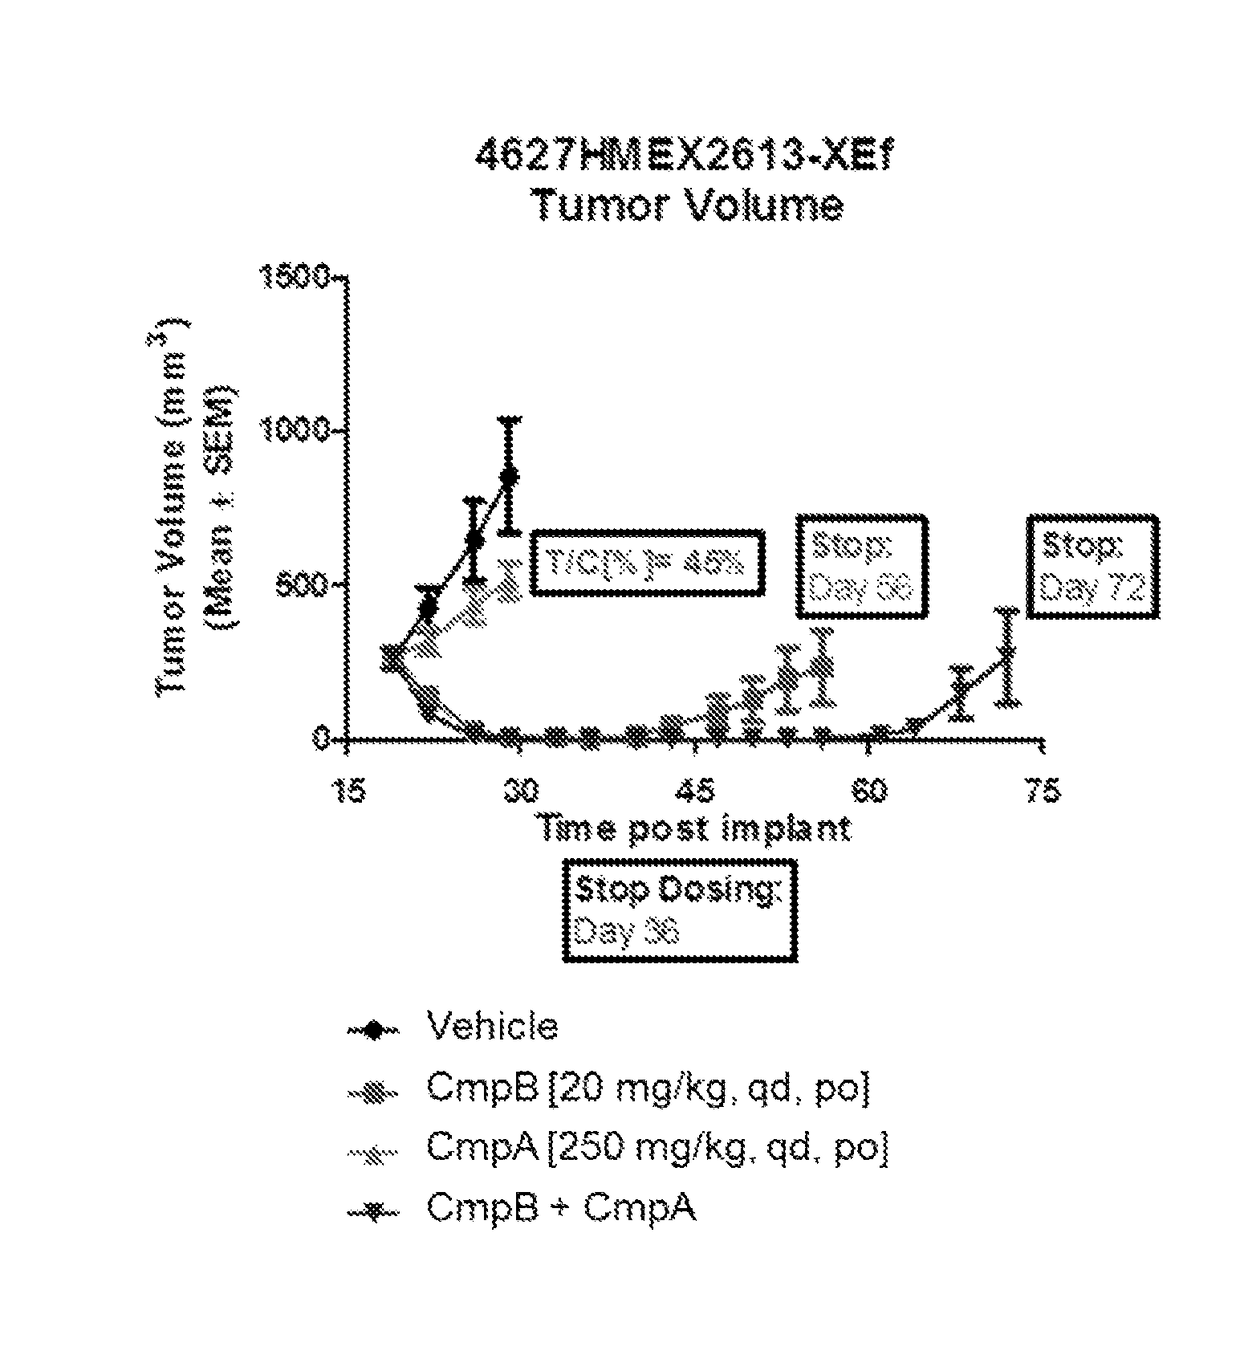 Pharmaceutical combinations of a CDK4/6 inhibitor and a B-RAF inhibitor